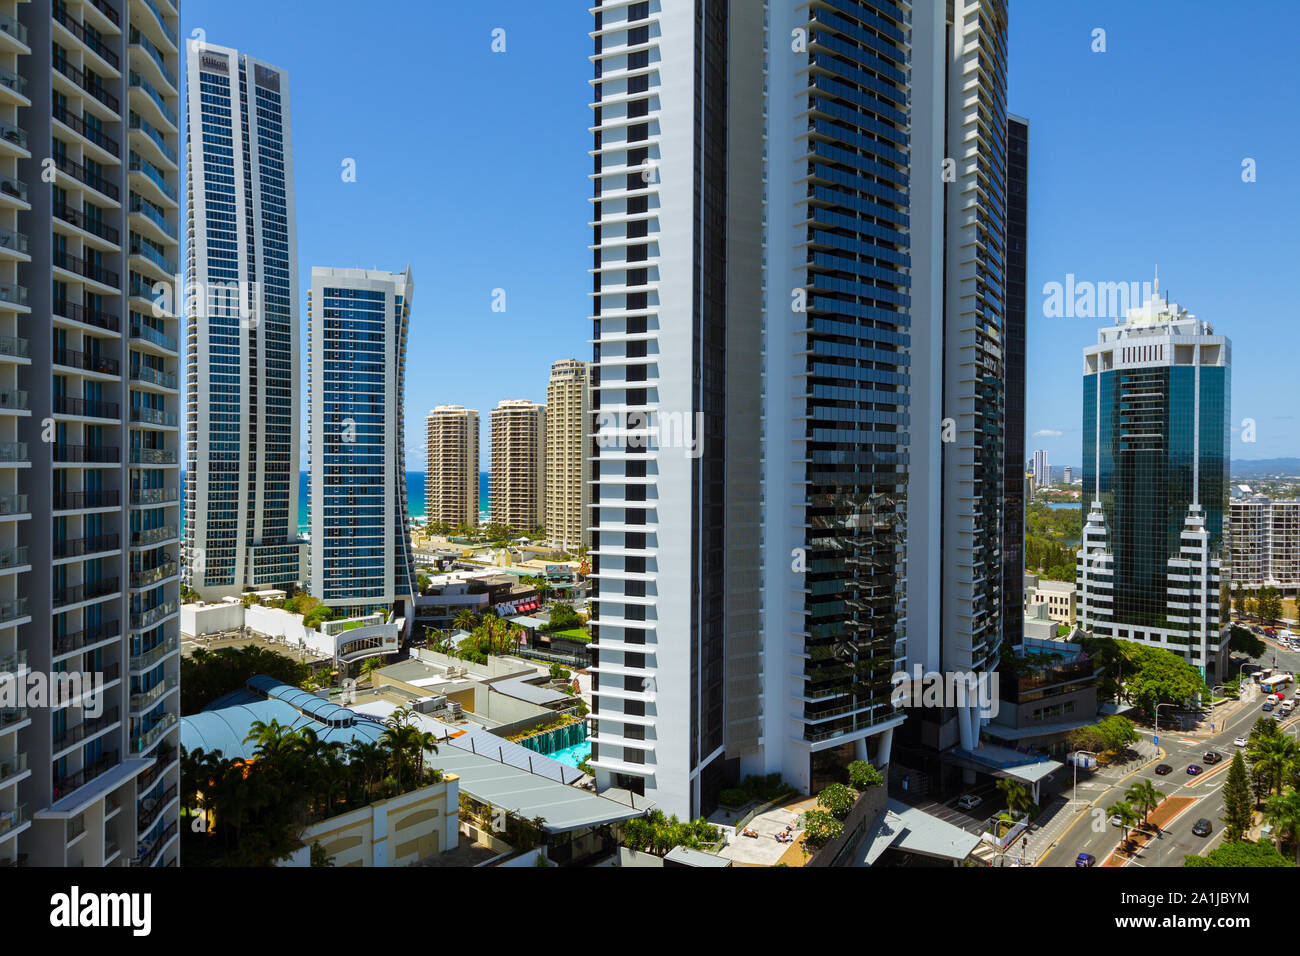 Surfers Paradise highrise buildings including Chevron Renaissance, Hilton Hotel and Mantra Circle on Cavill on the Gold Coast of Queensland, Australia Stock Photo